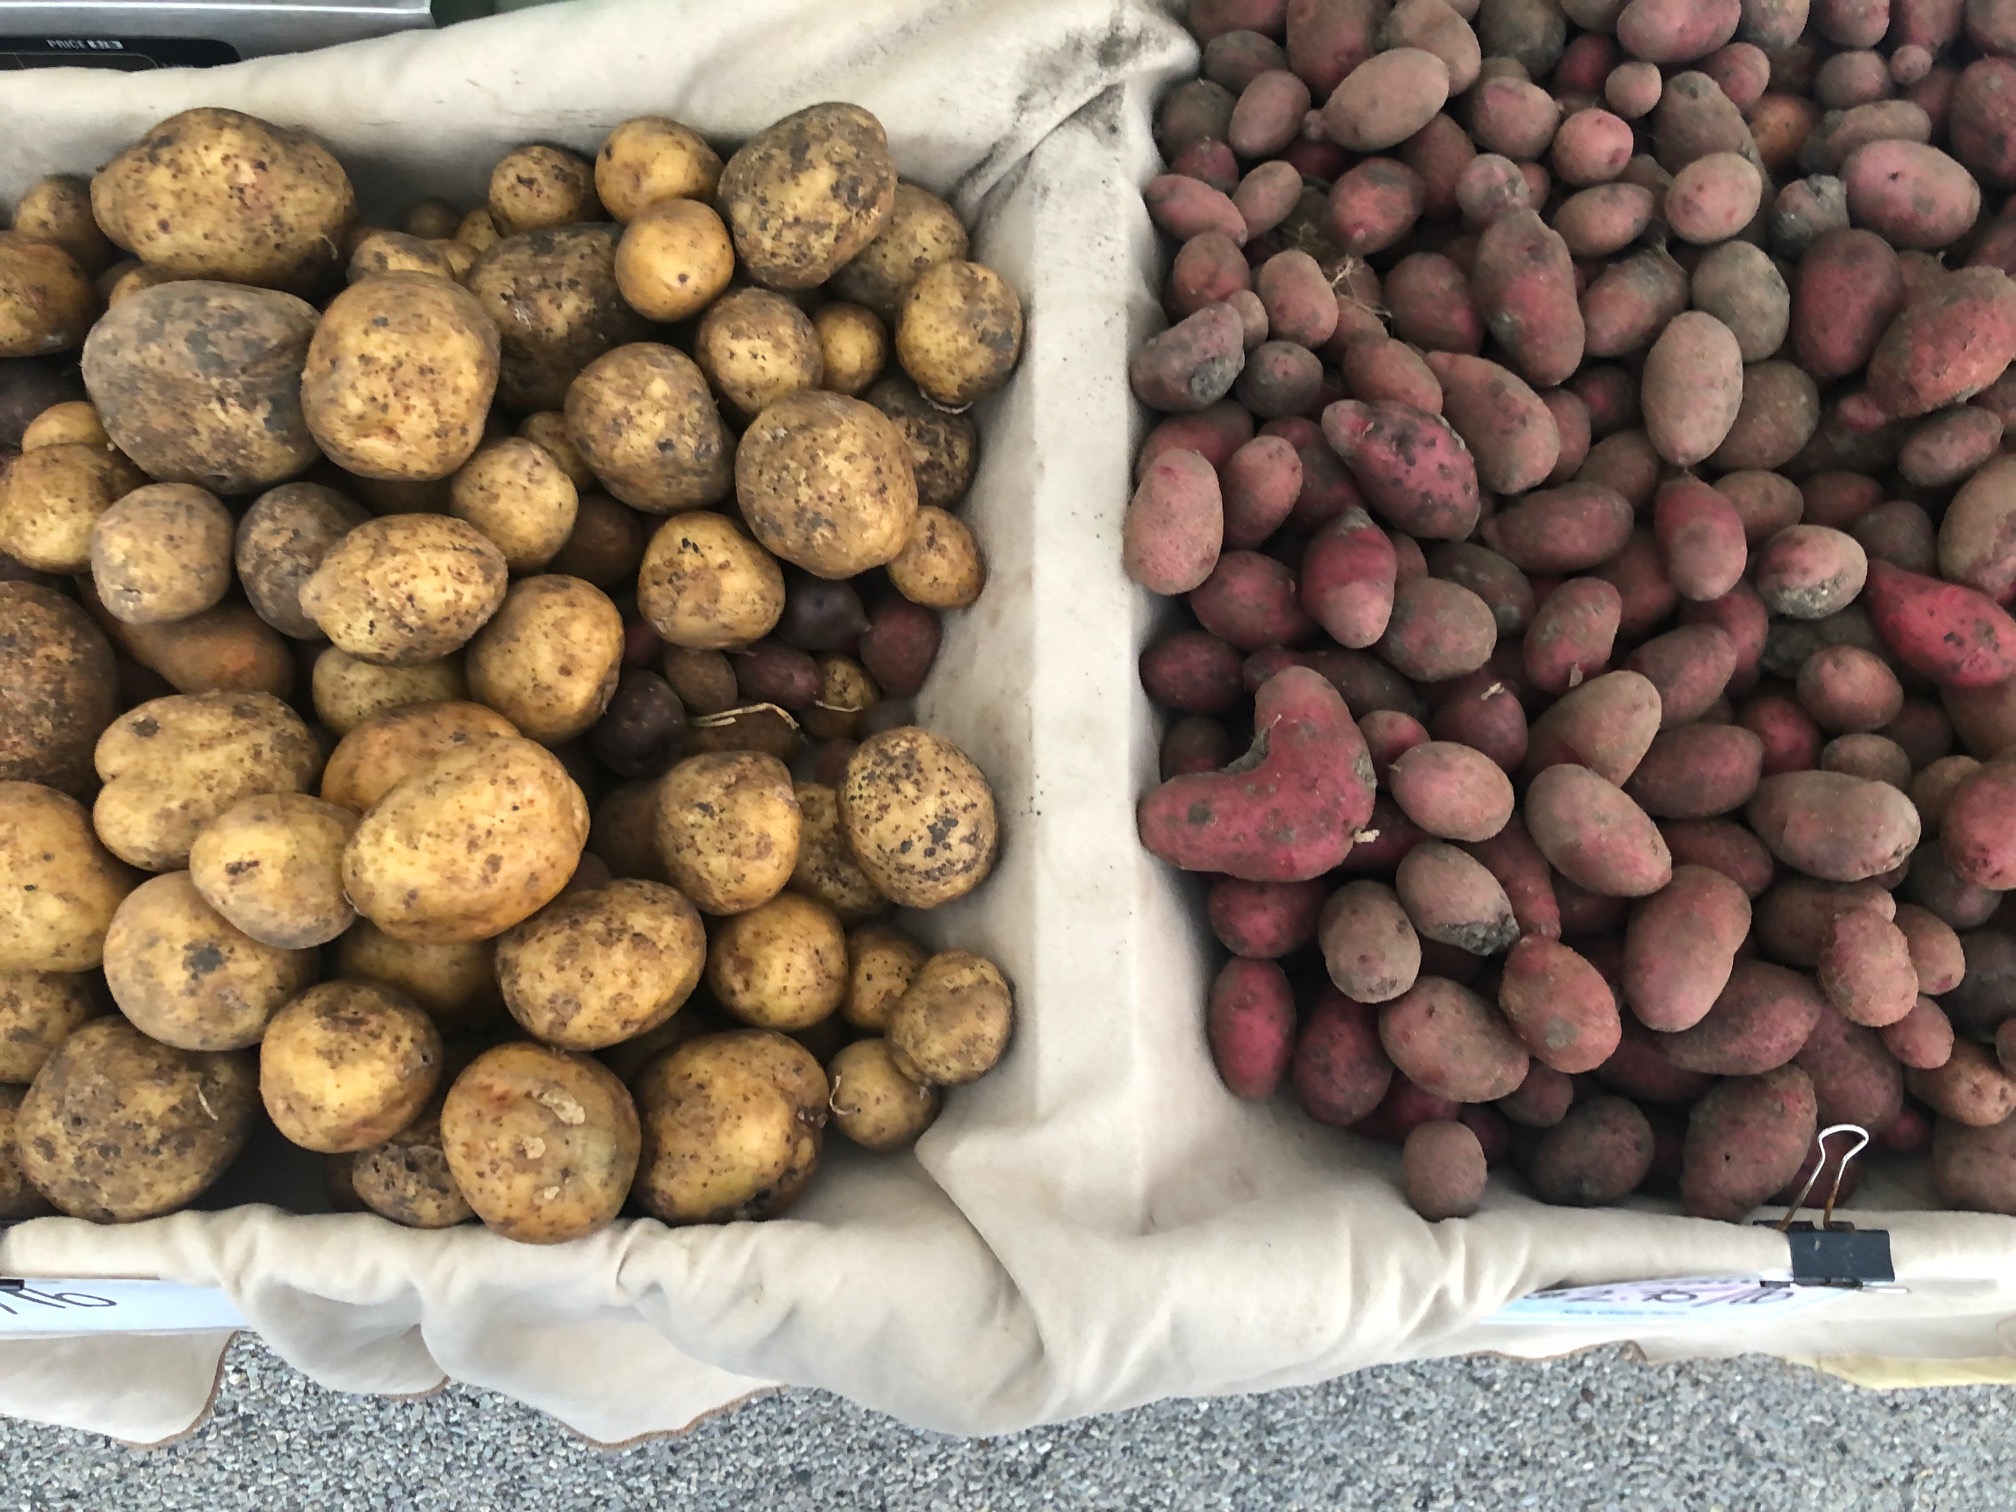 From overhead, there are two burlap lined baskets of potatoes. On the left, russet potatoes, and on the right, red potatoes. Photo by Alyssa Buckley.